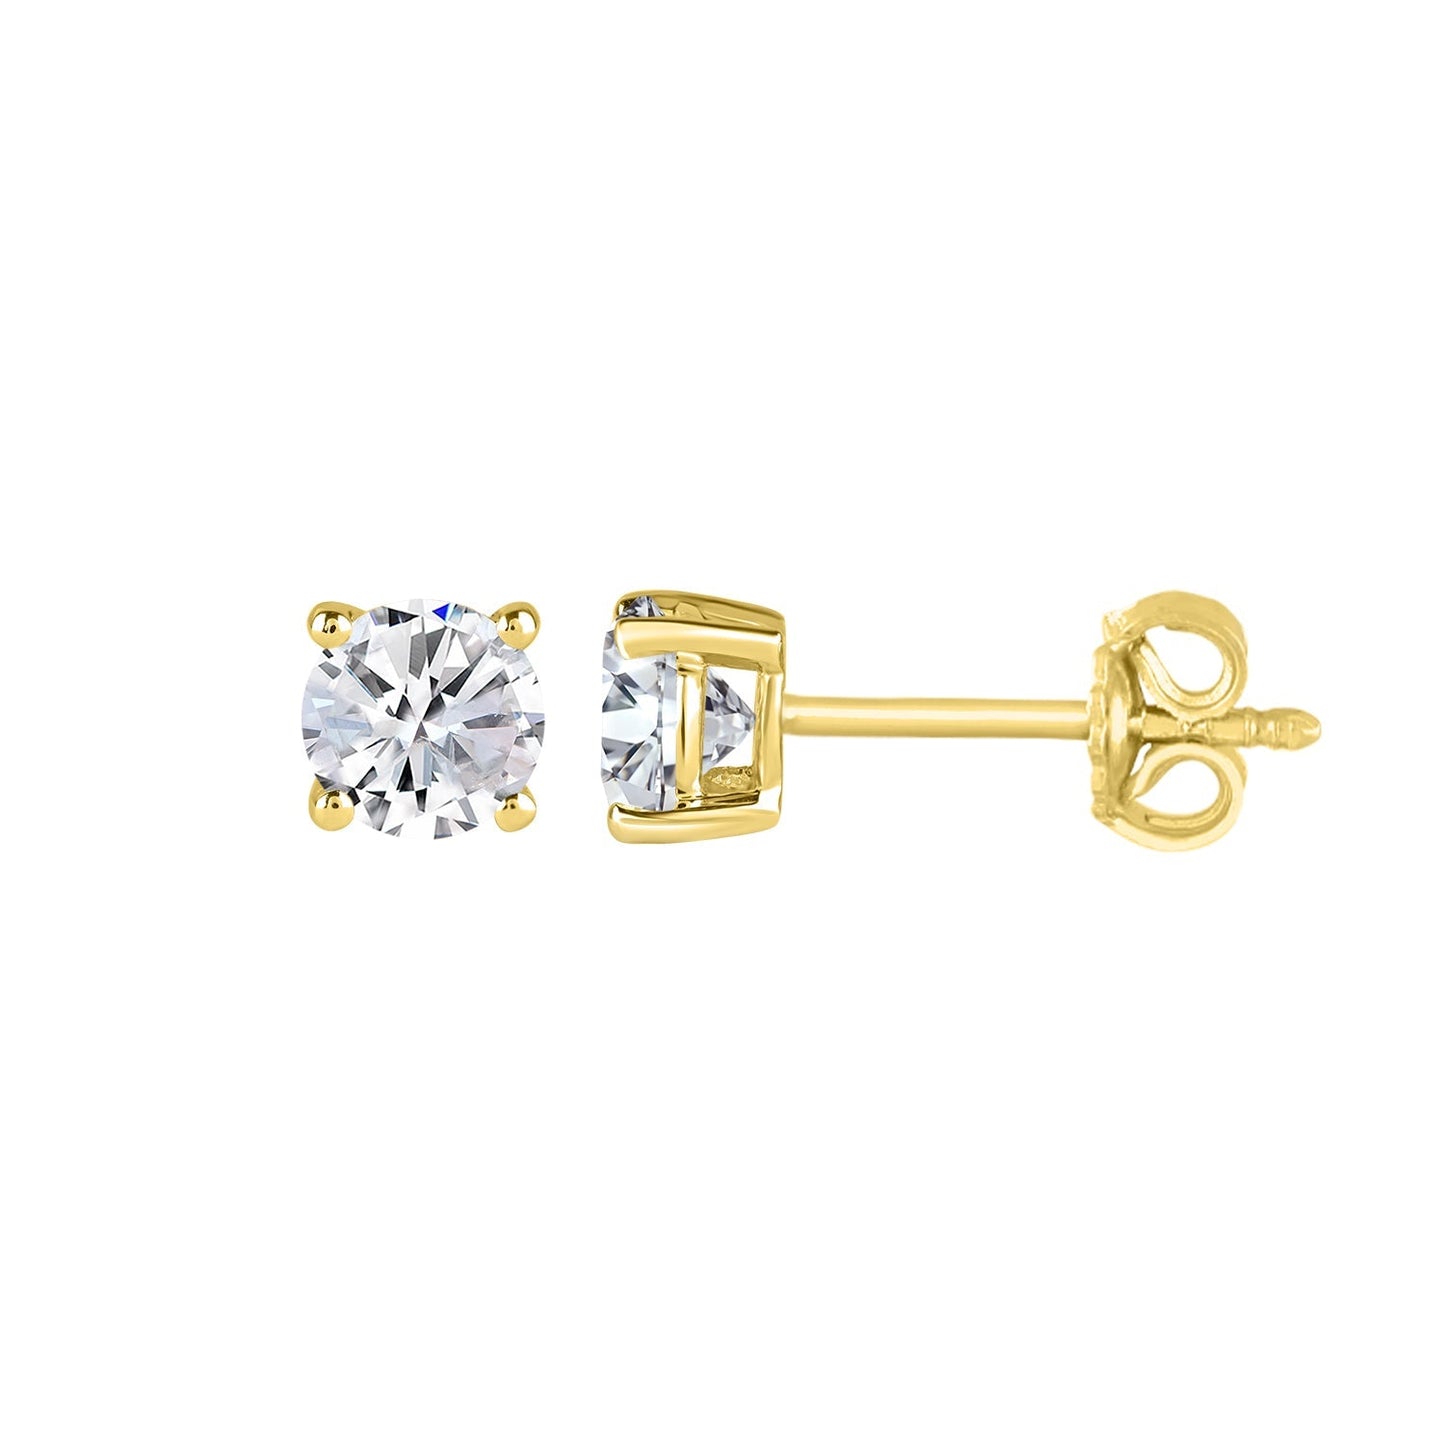 0.50 Carat Solitaire Stud Earrings with Friction Back in 14K Gold